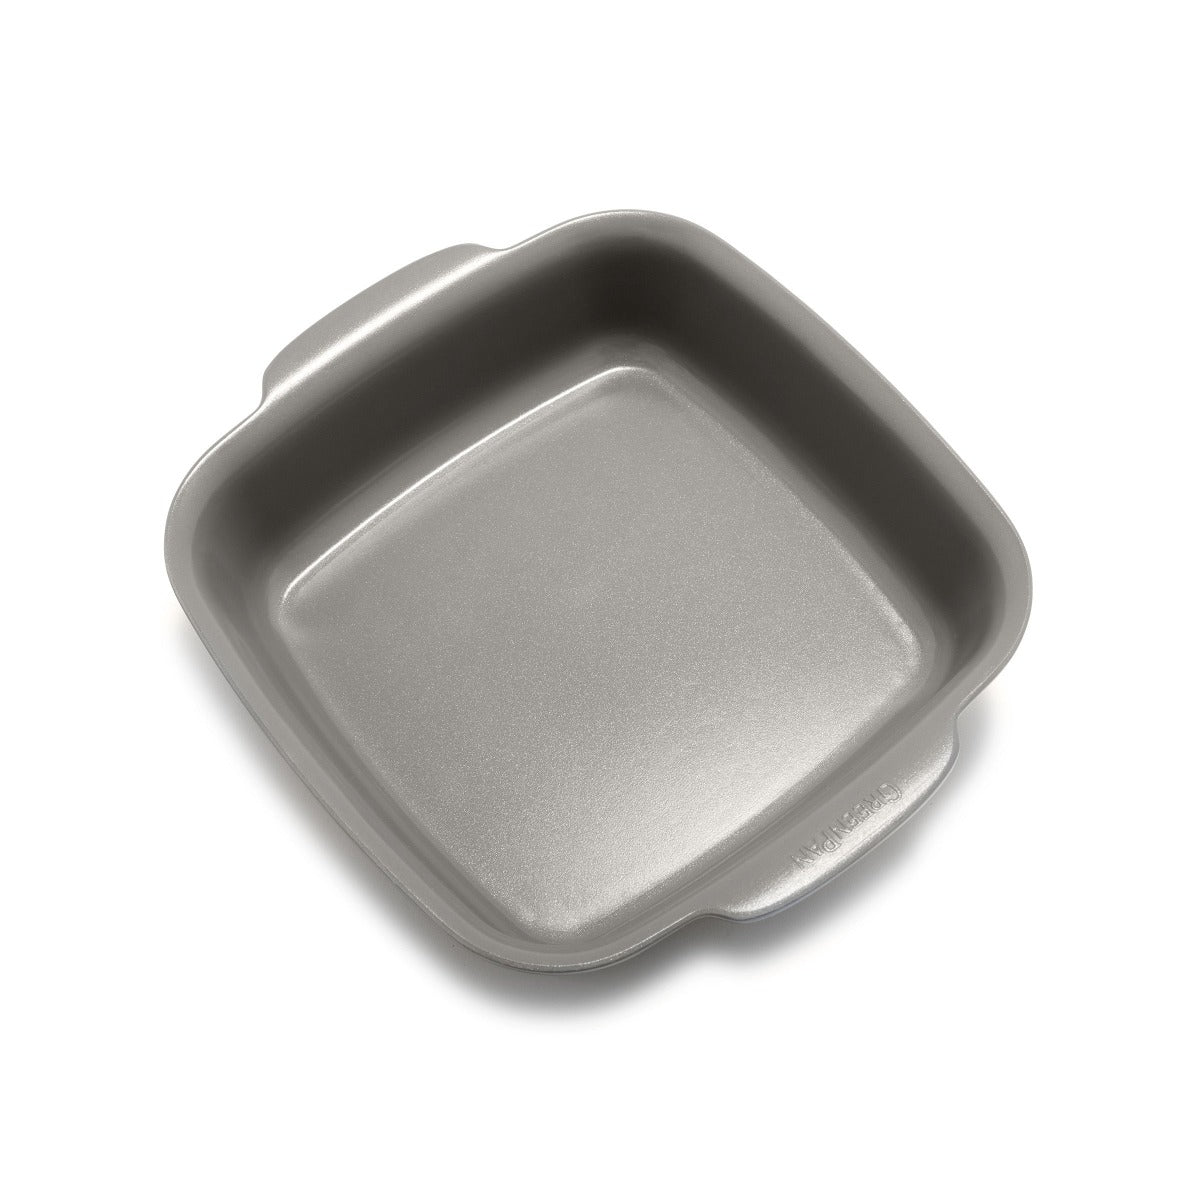 THE PAMPERED CHEF Aluminized Steel Metal Baking Pan 8X8 Square